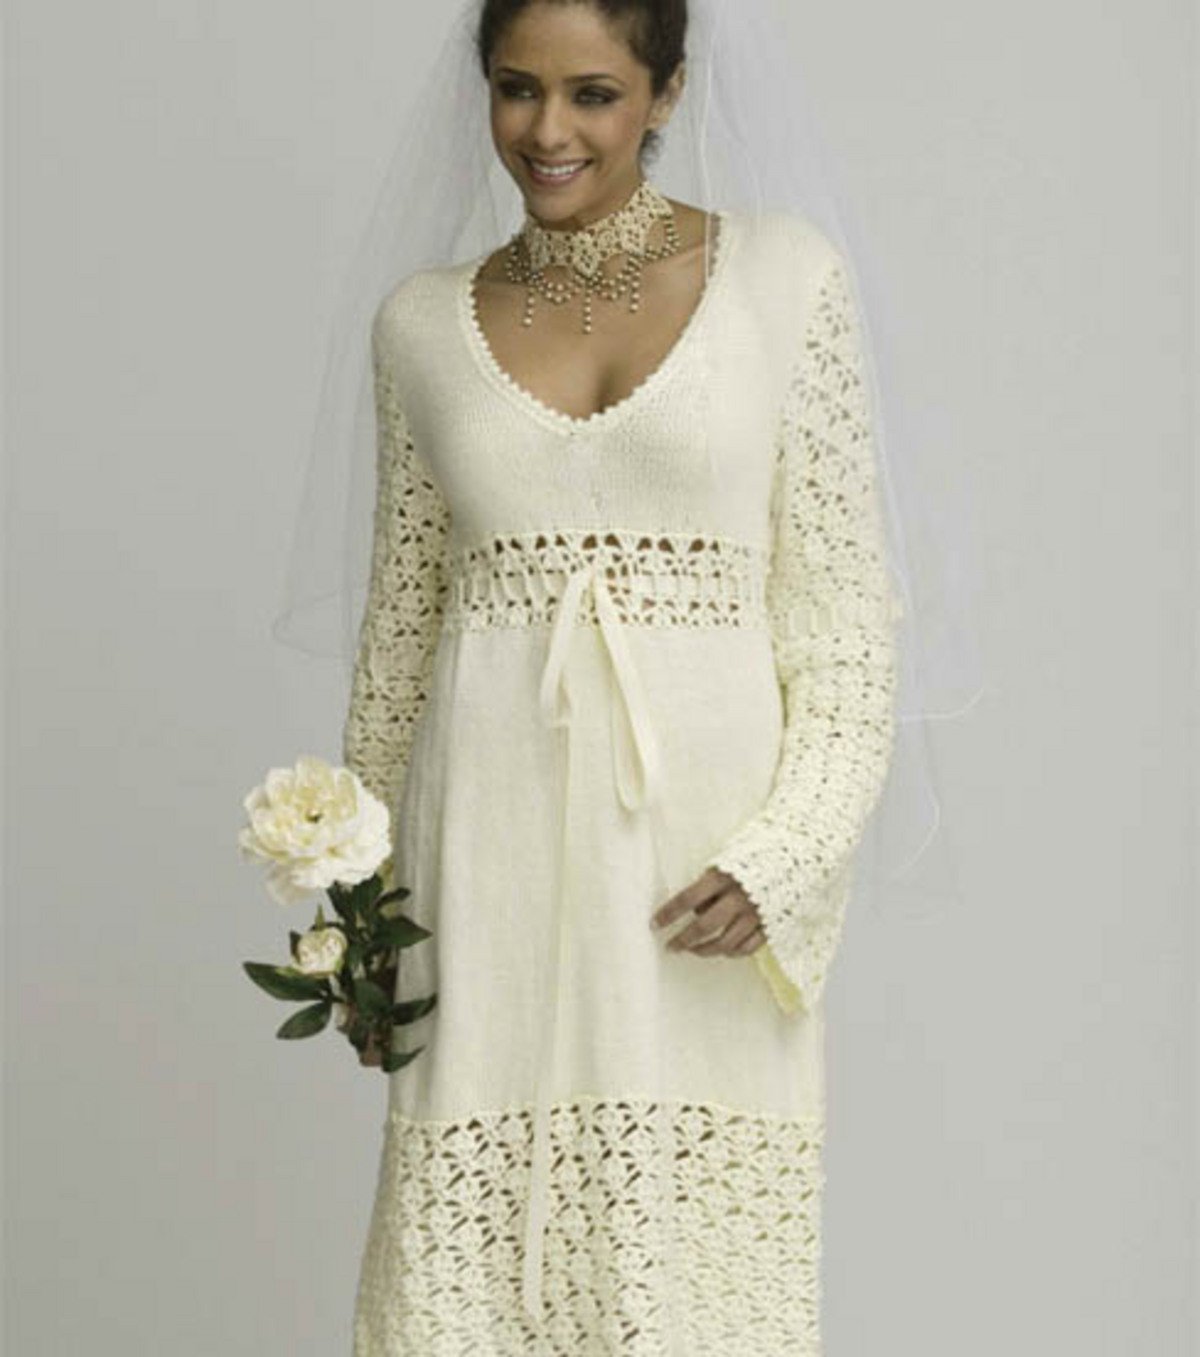 Crochet wedding dress patterns and wedding accessories to